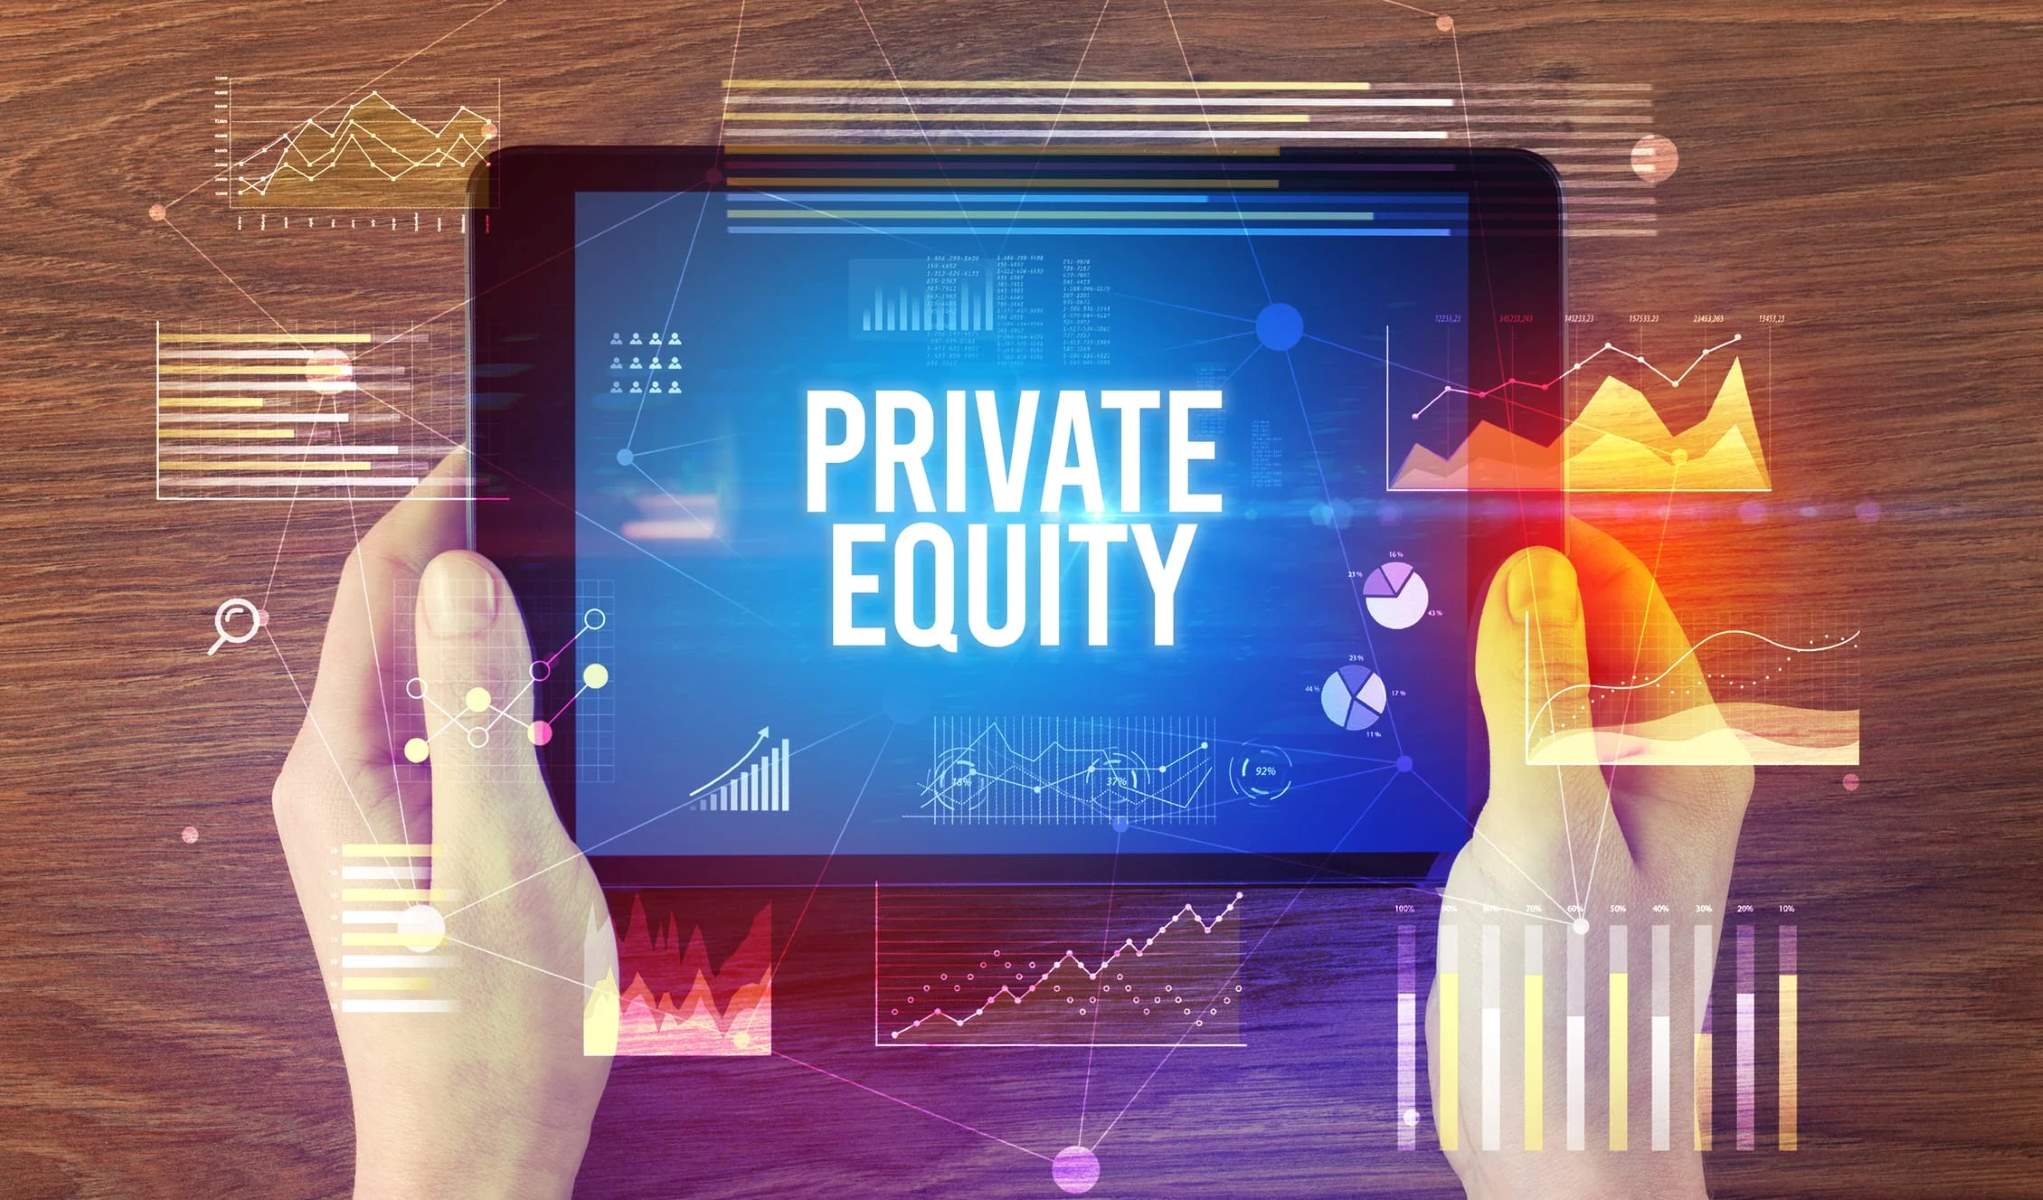 What Makes A Good Private Equity Investment